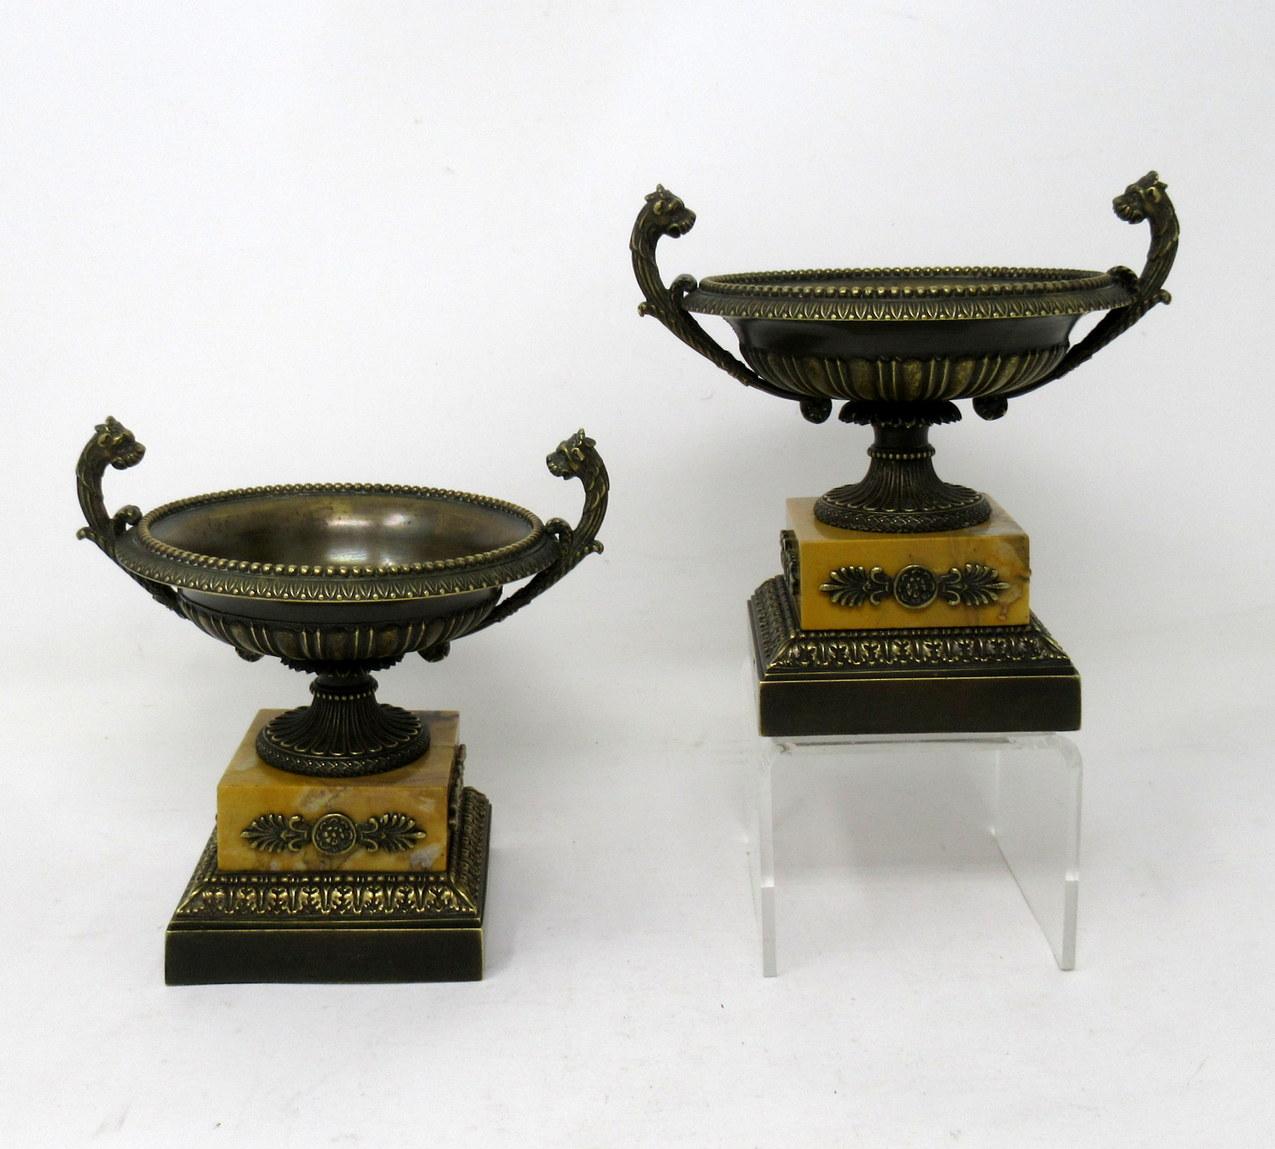 A very fine pair of French patinated bronze and well grained Sienna marble grand tour twin handle tazza of compact proportions, first quarter of the 19th century.

Each circular bowl with lobed reeded body and decorative moulded thumb detail rims